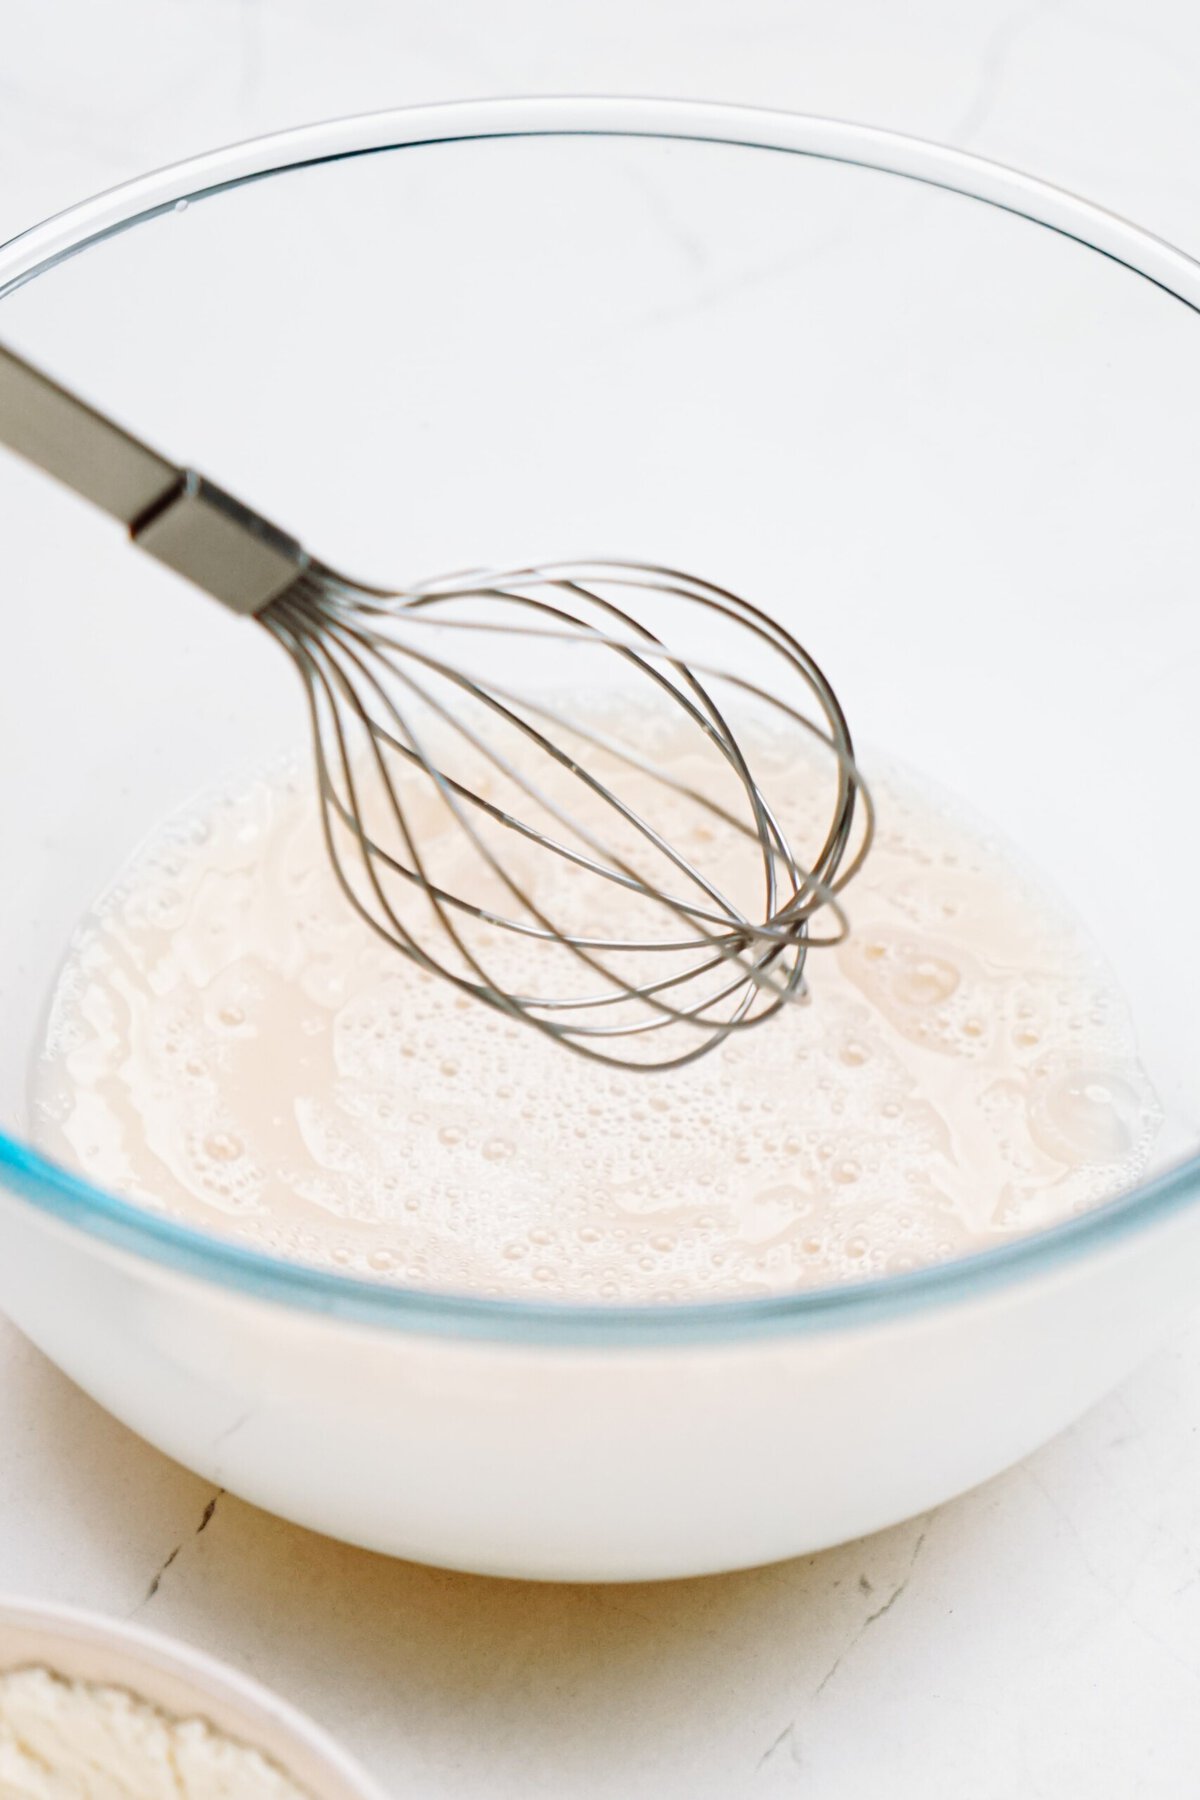 whisking water and yeast together